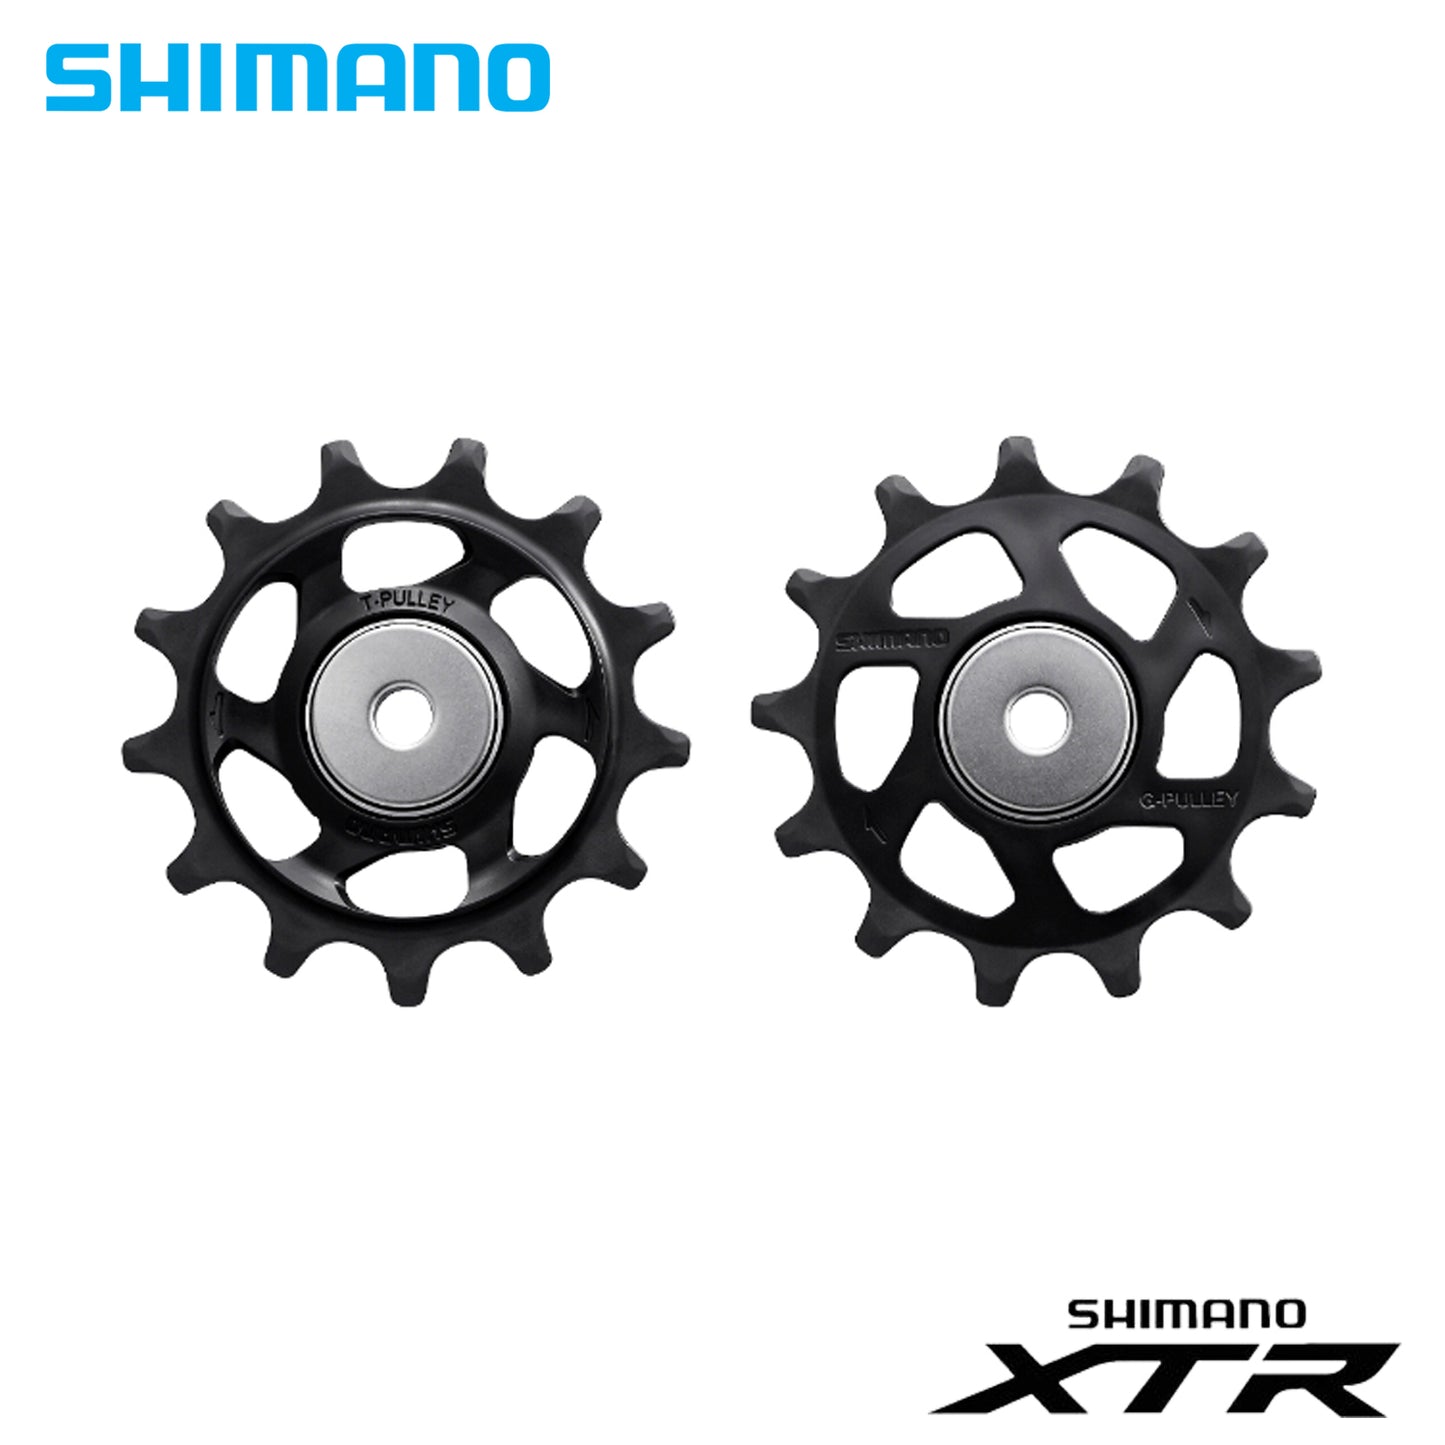 Shimano Pulley Set for RD-M9100/M9120 - Y3FA98090